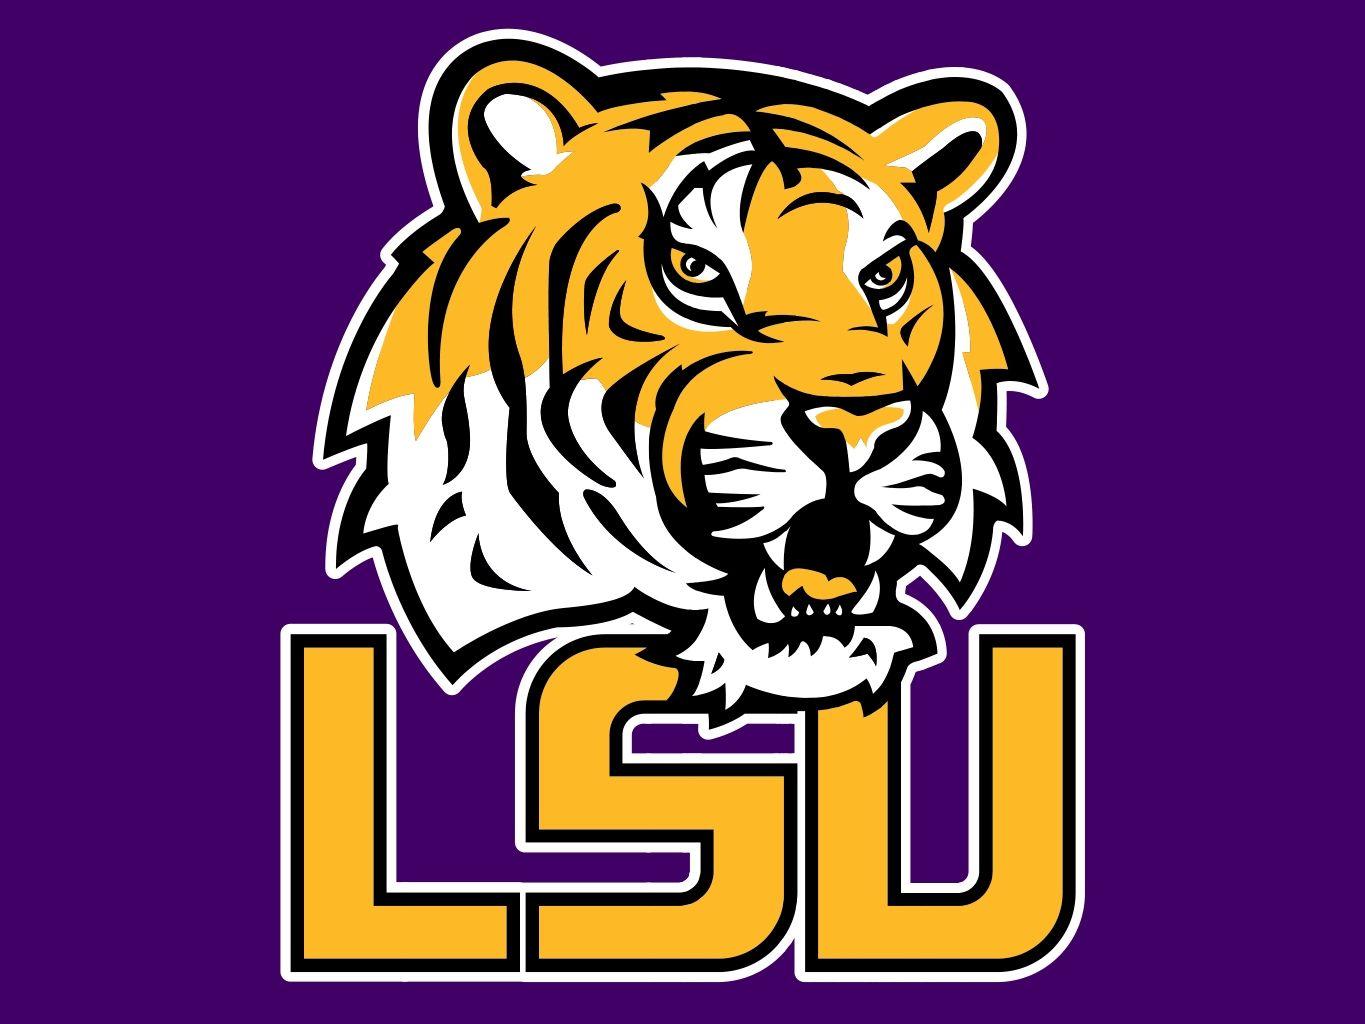 Download wallpapers LSU Tigers glitter logo NCAA violet yellow checkered  background USA american football team LSU Tigers logo mosaic art  american football America Louisiana State University for desktop free  Pictures for desktop